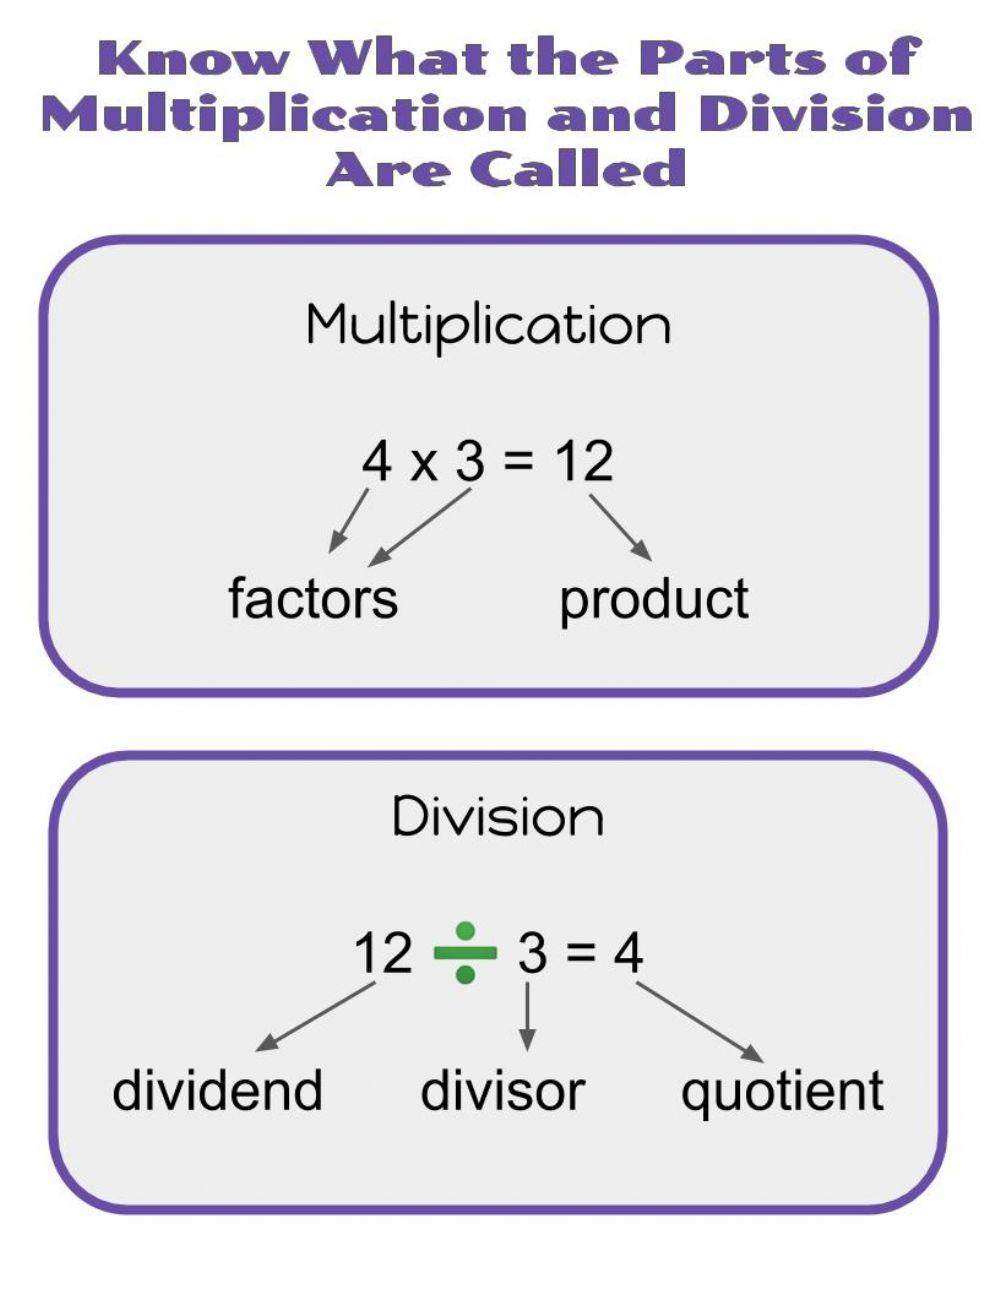 Names of parts of multiplication and division